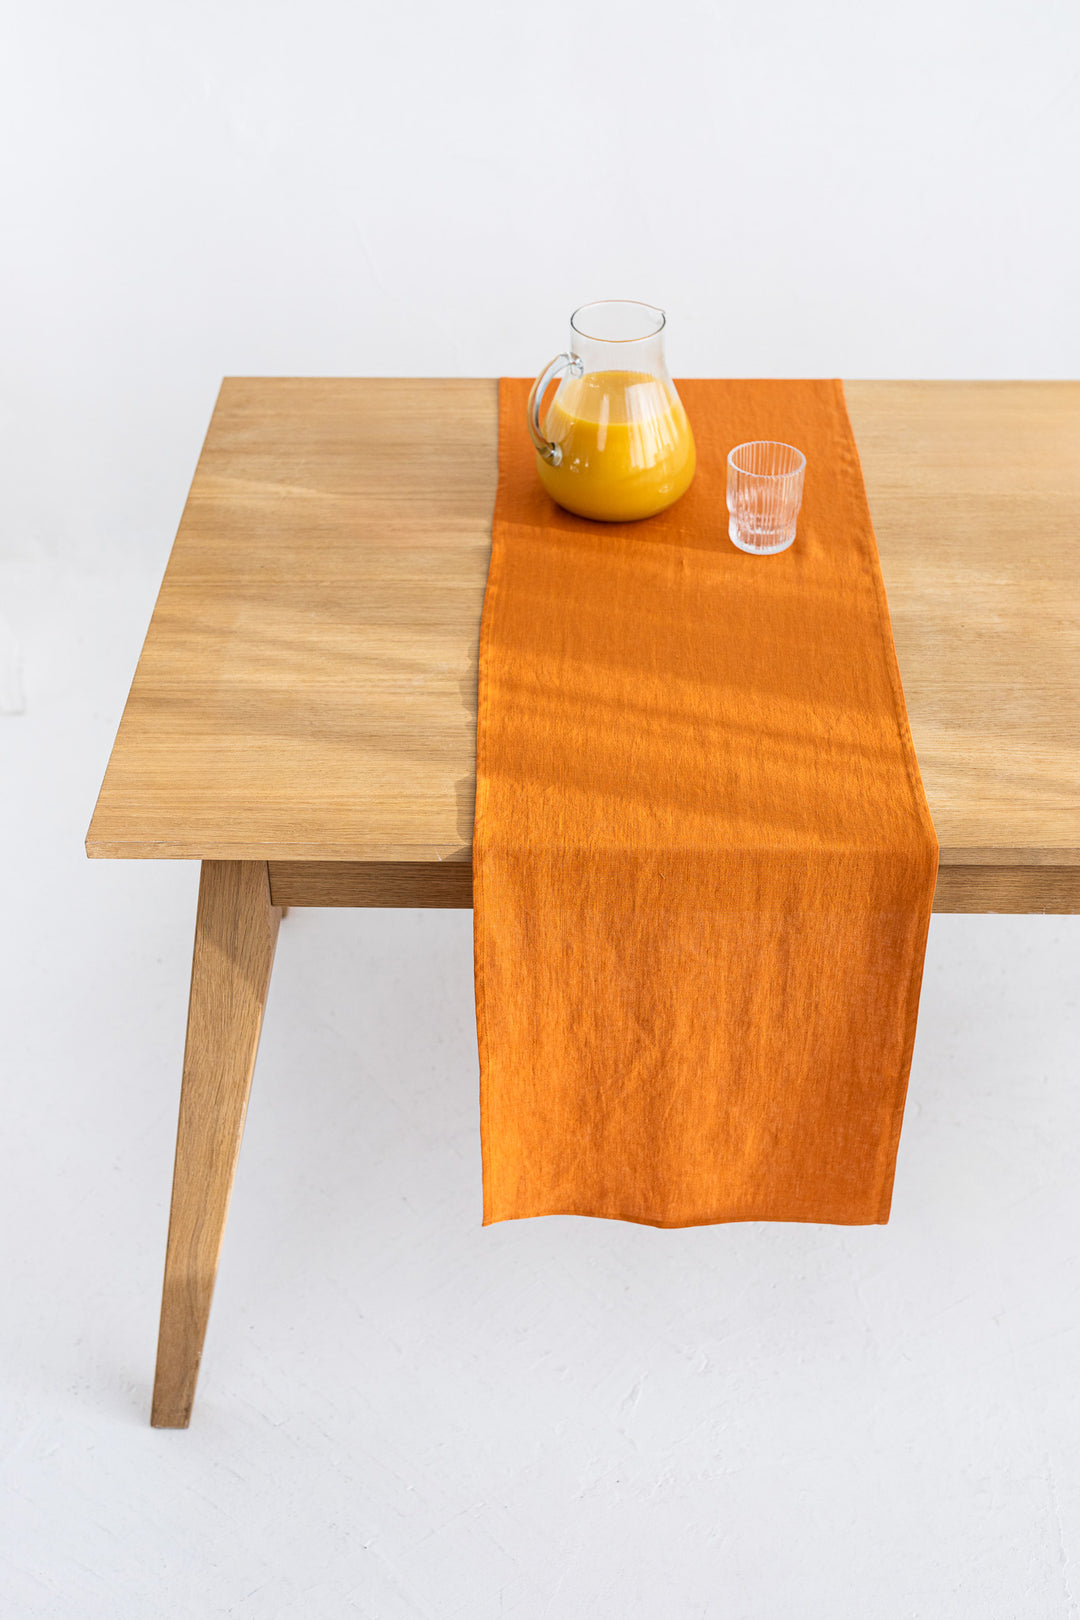 Linen Table Runner On Table In Mustard Color - Daily Linen